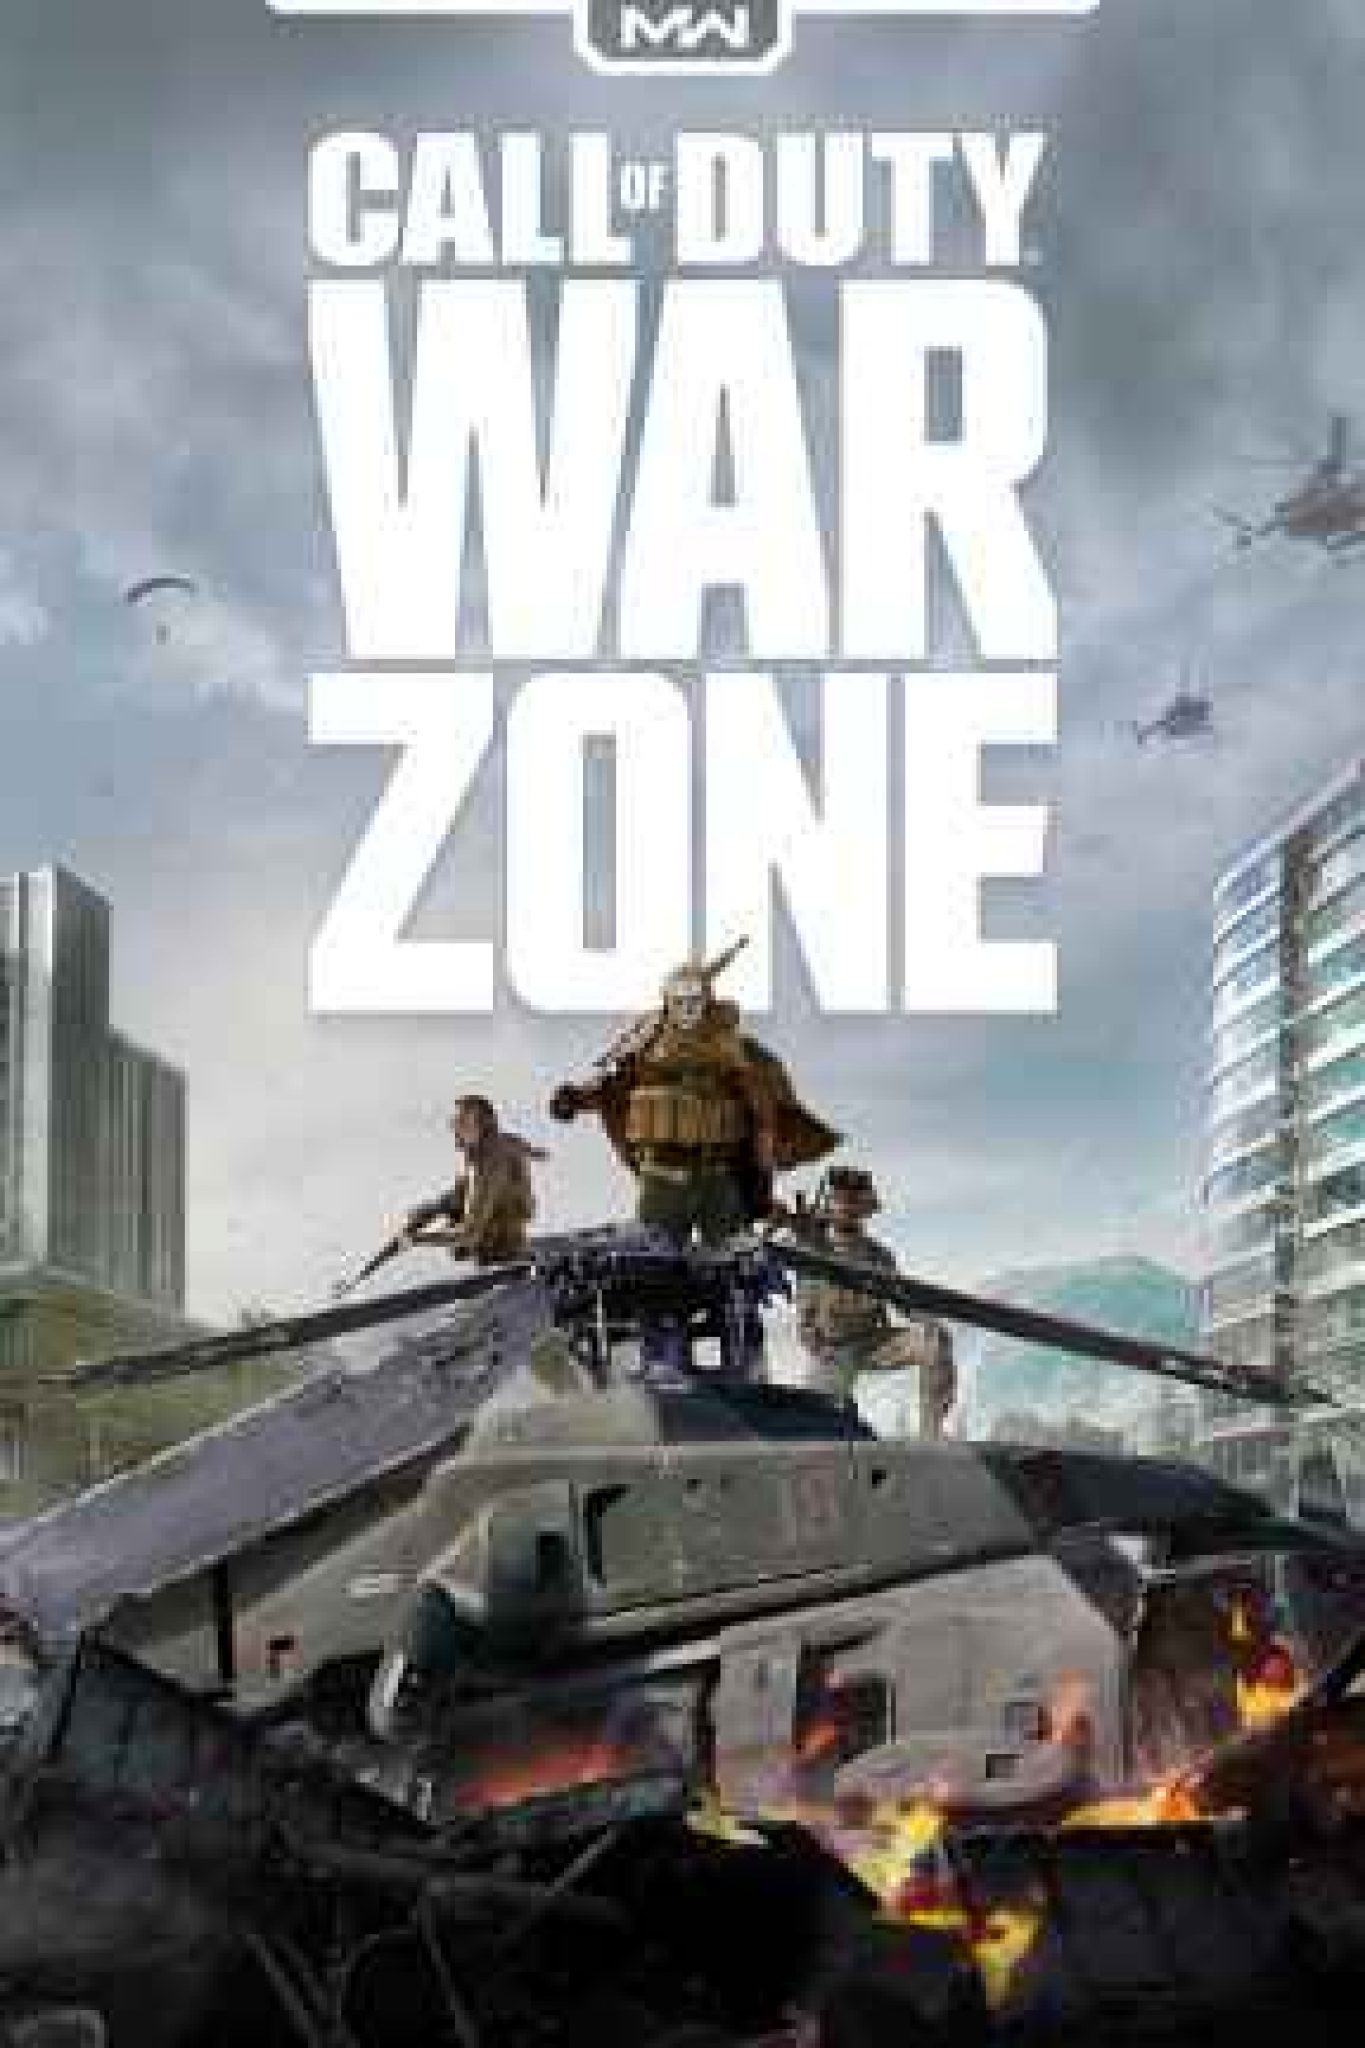 call of duty warzone download pc